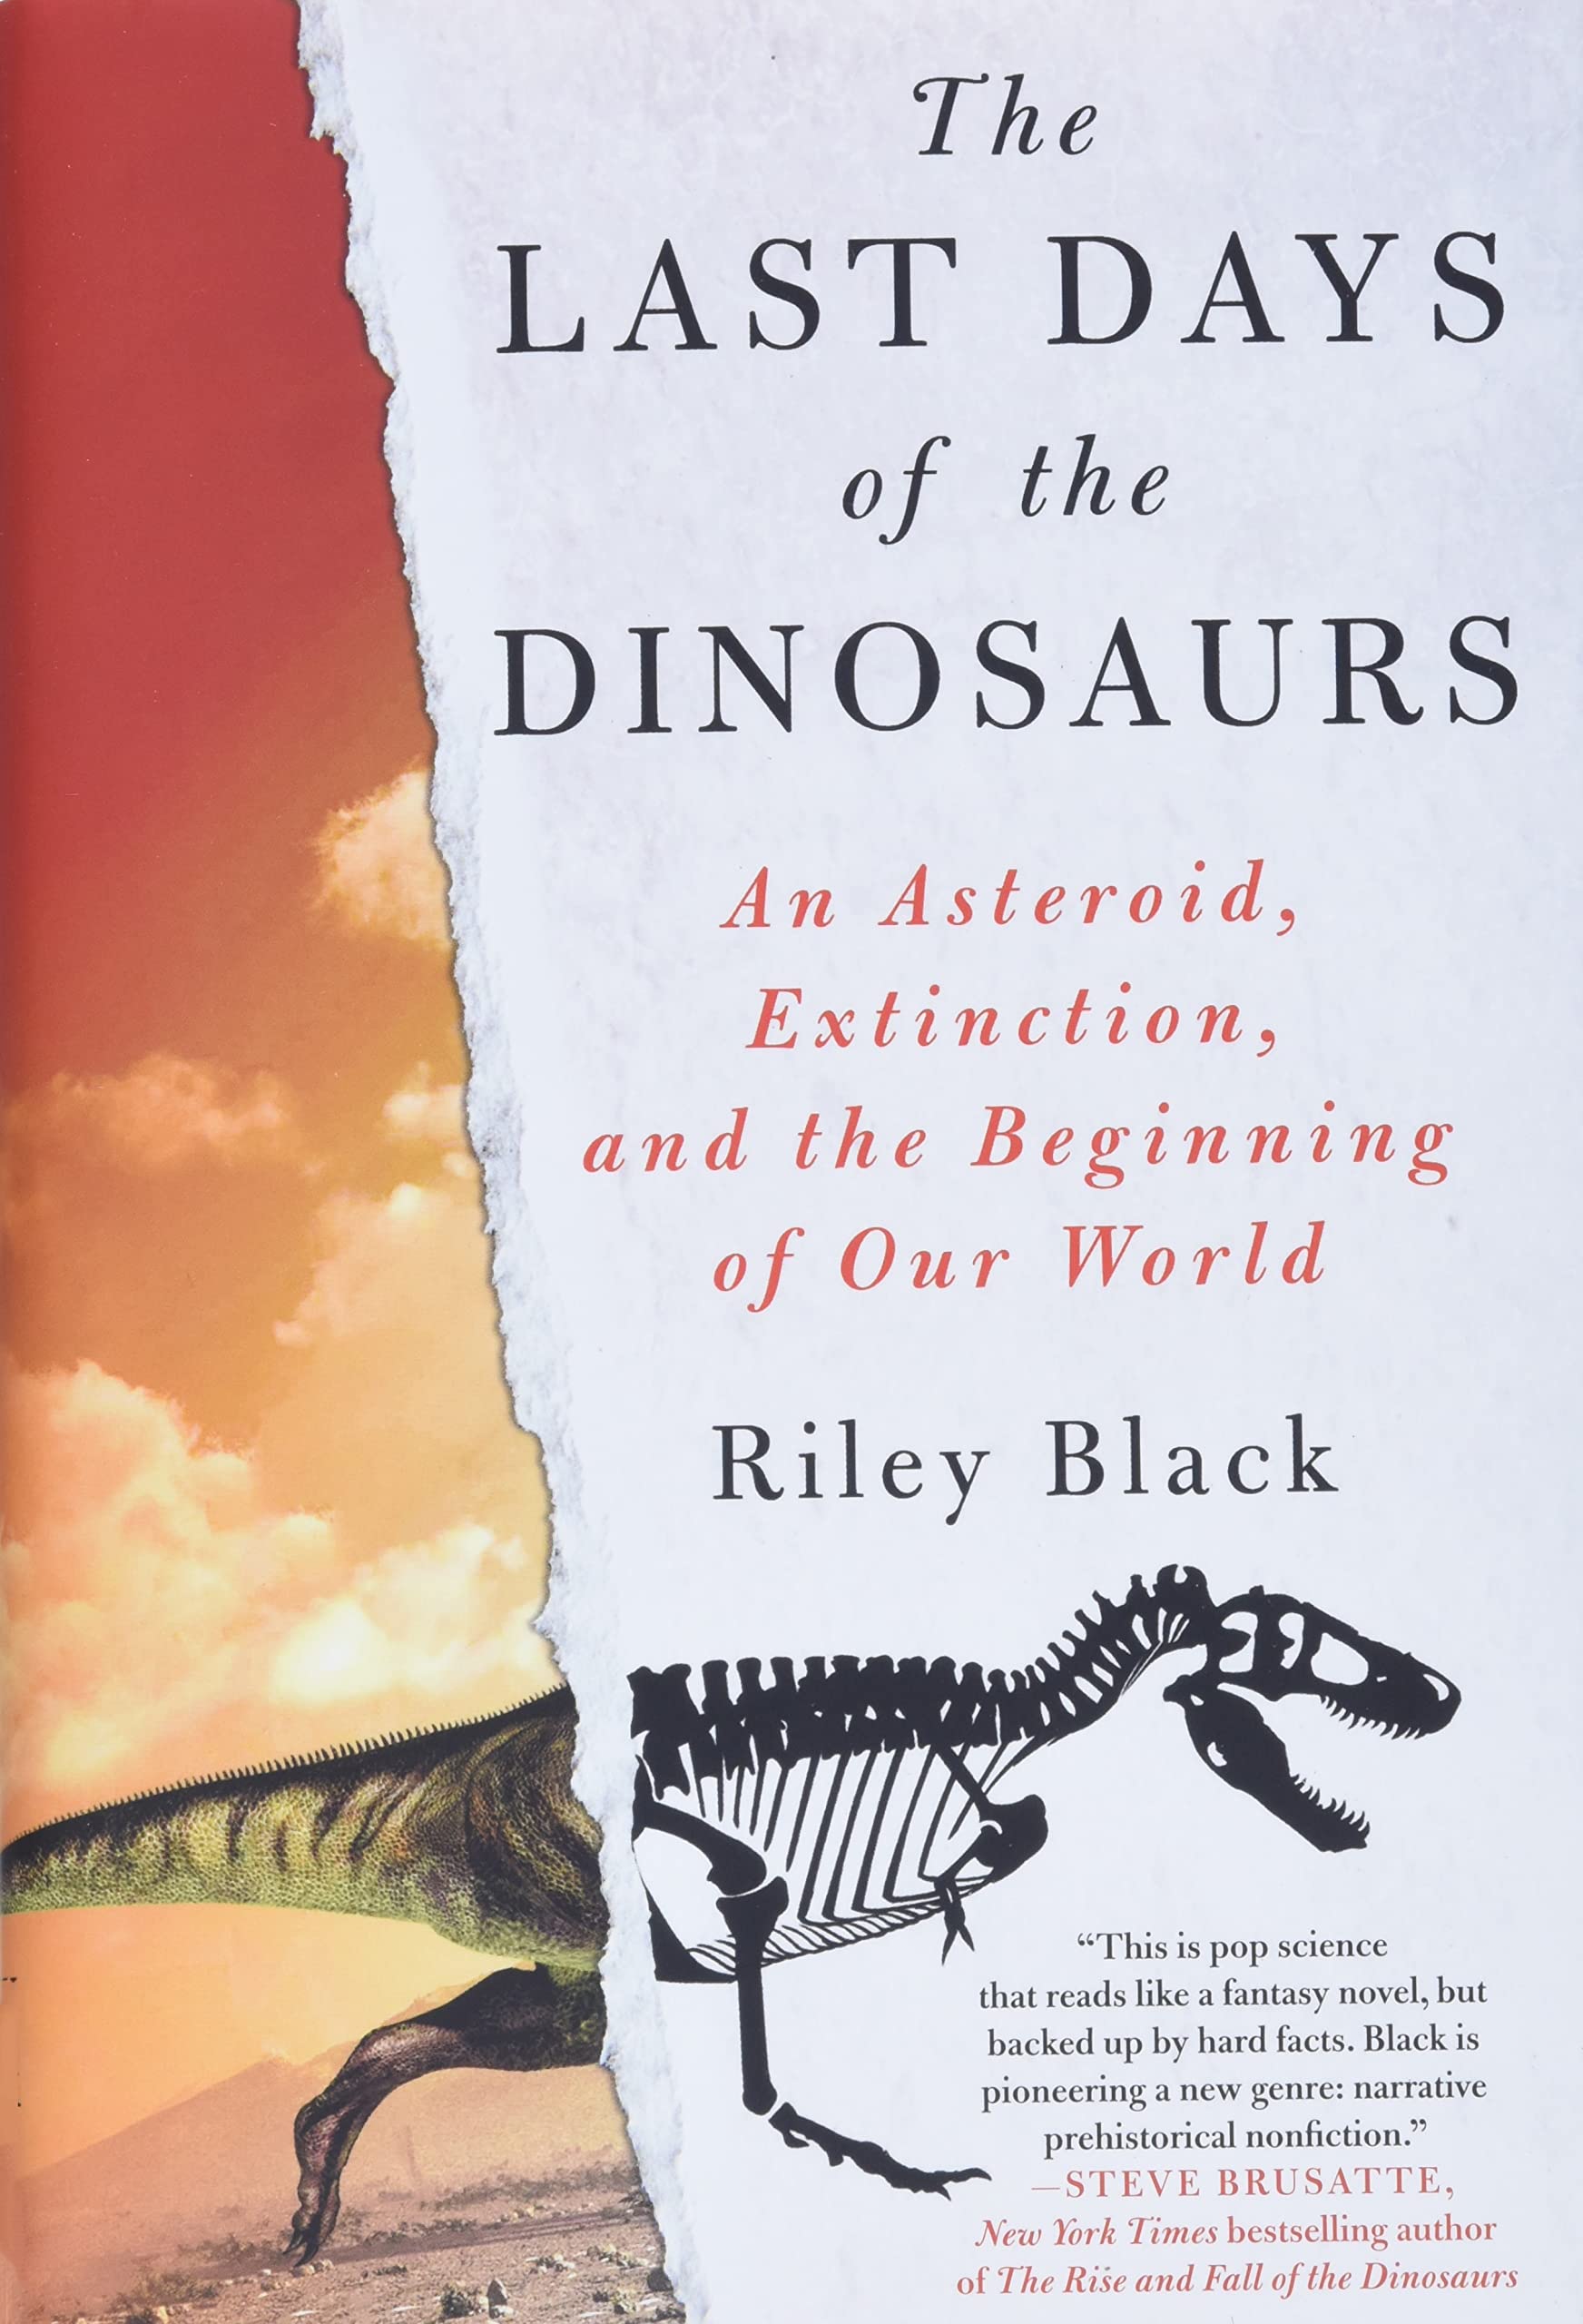 Image for "The Last Days of the Dinosaurs"